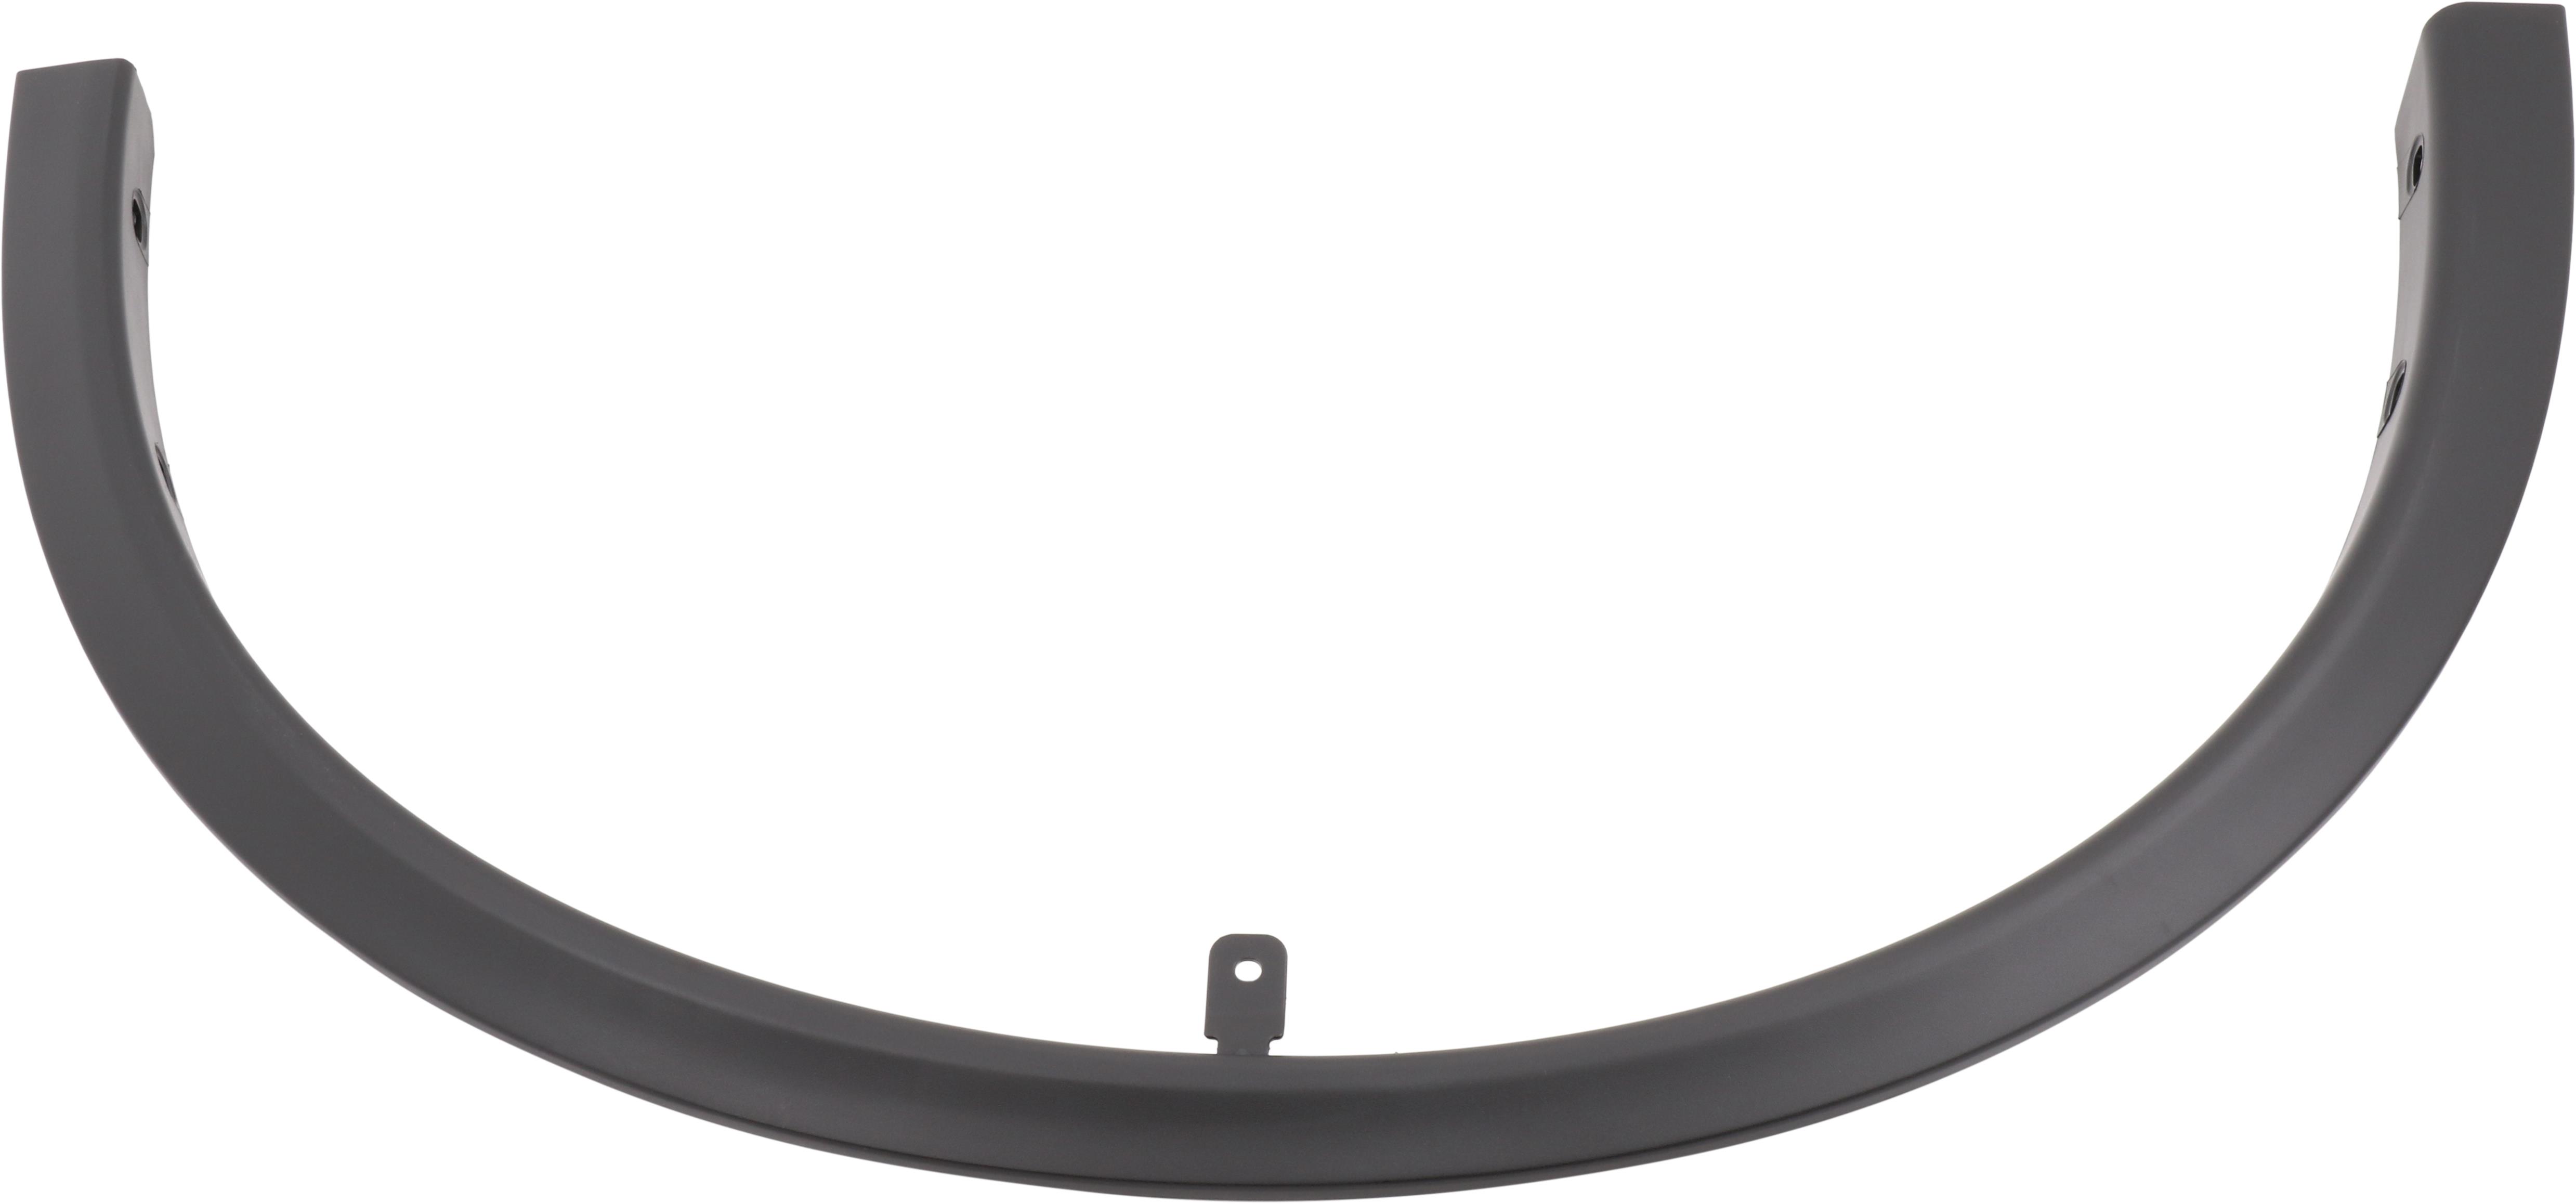 2020 Nissan Rogue Wheel Arch Molding (Right, Front, Rear) - 63860